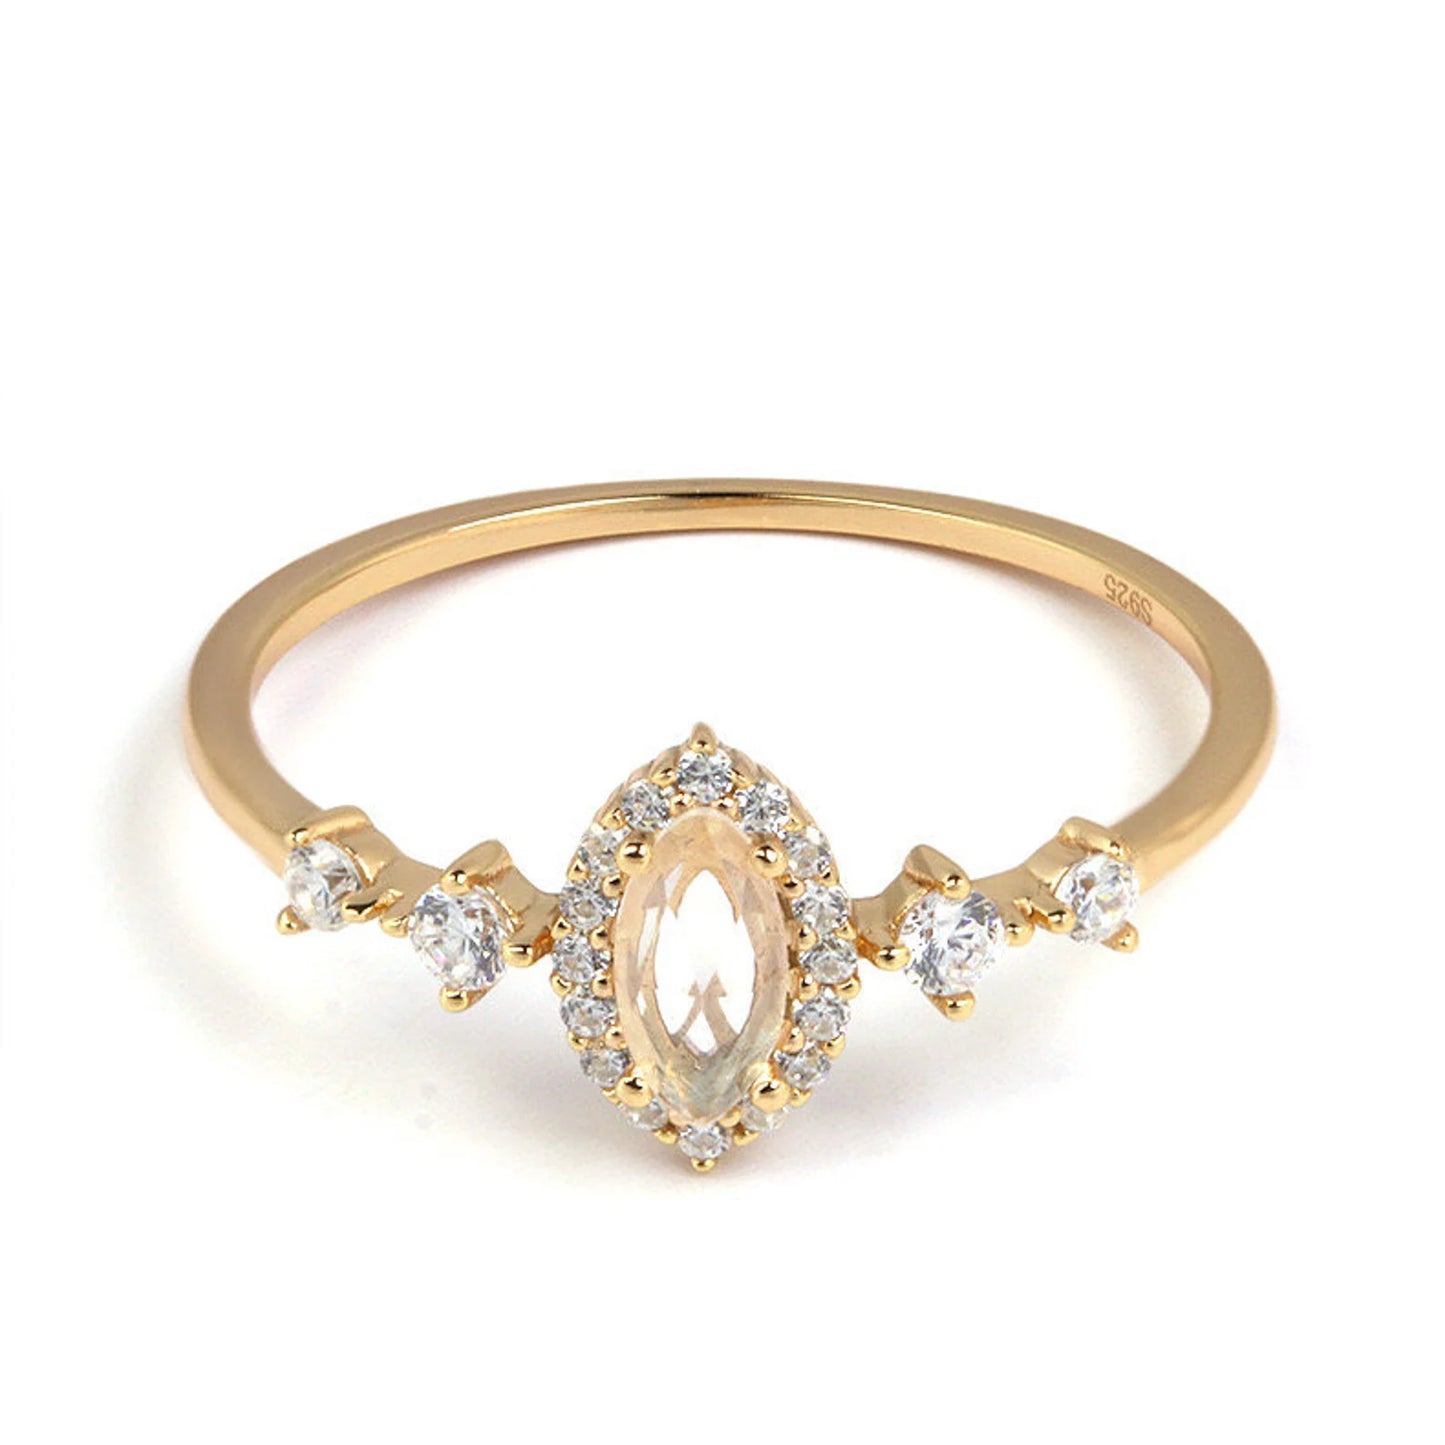 Jaqueline ring size 8